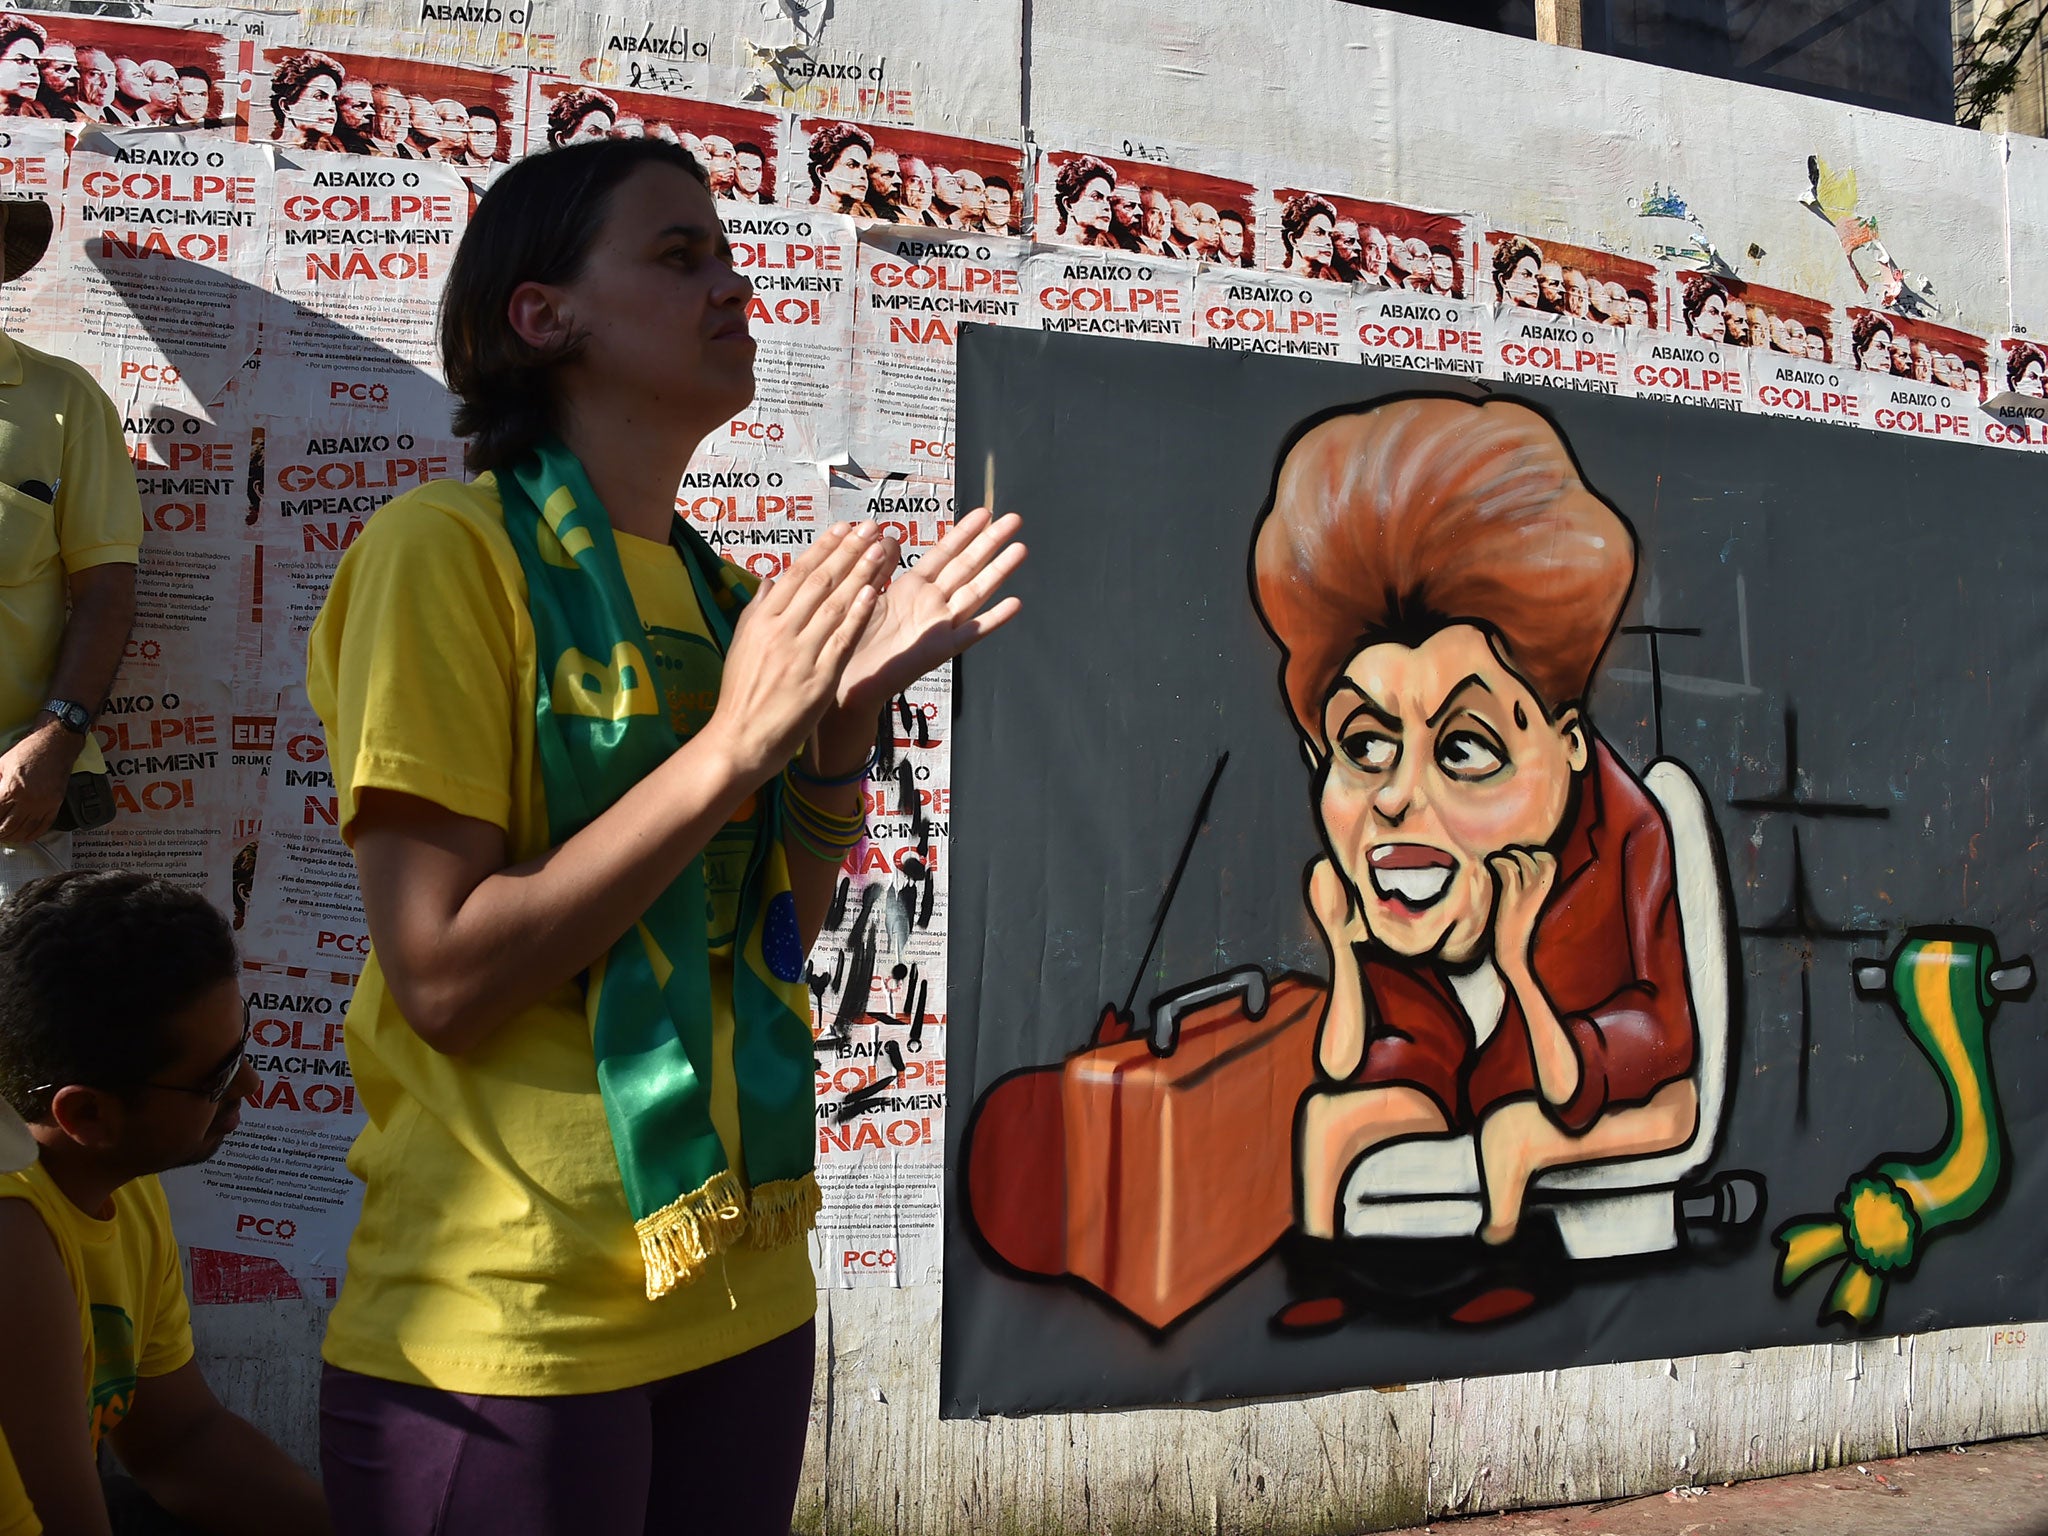 Dilma Rousseff has lost support of voters